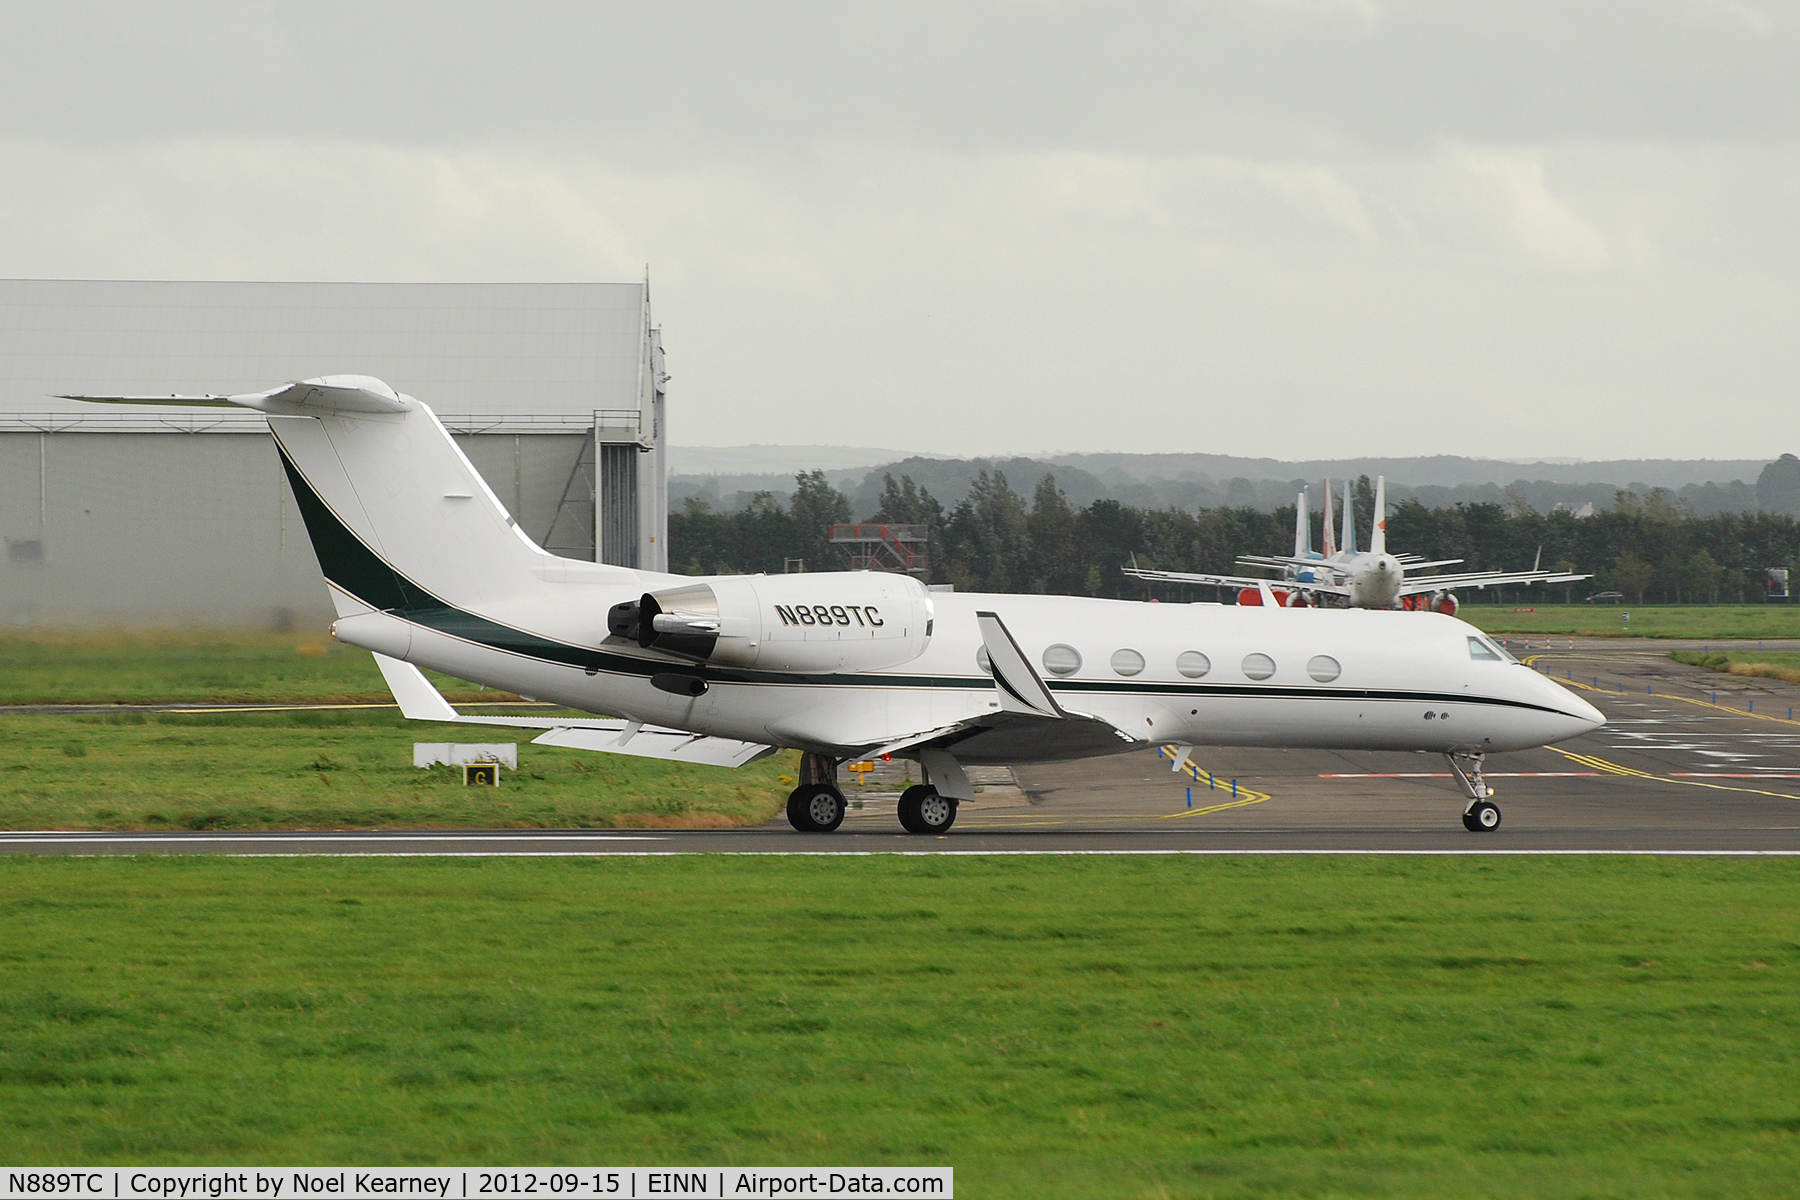 N889TC, 1987 Gulfstream Aerospace G-IV C/N 1042, Departing off Rwy 24 after a quick fuel stop.